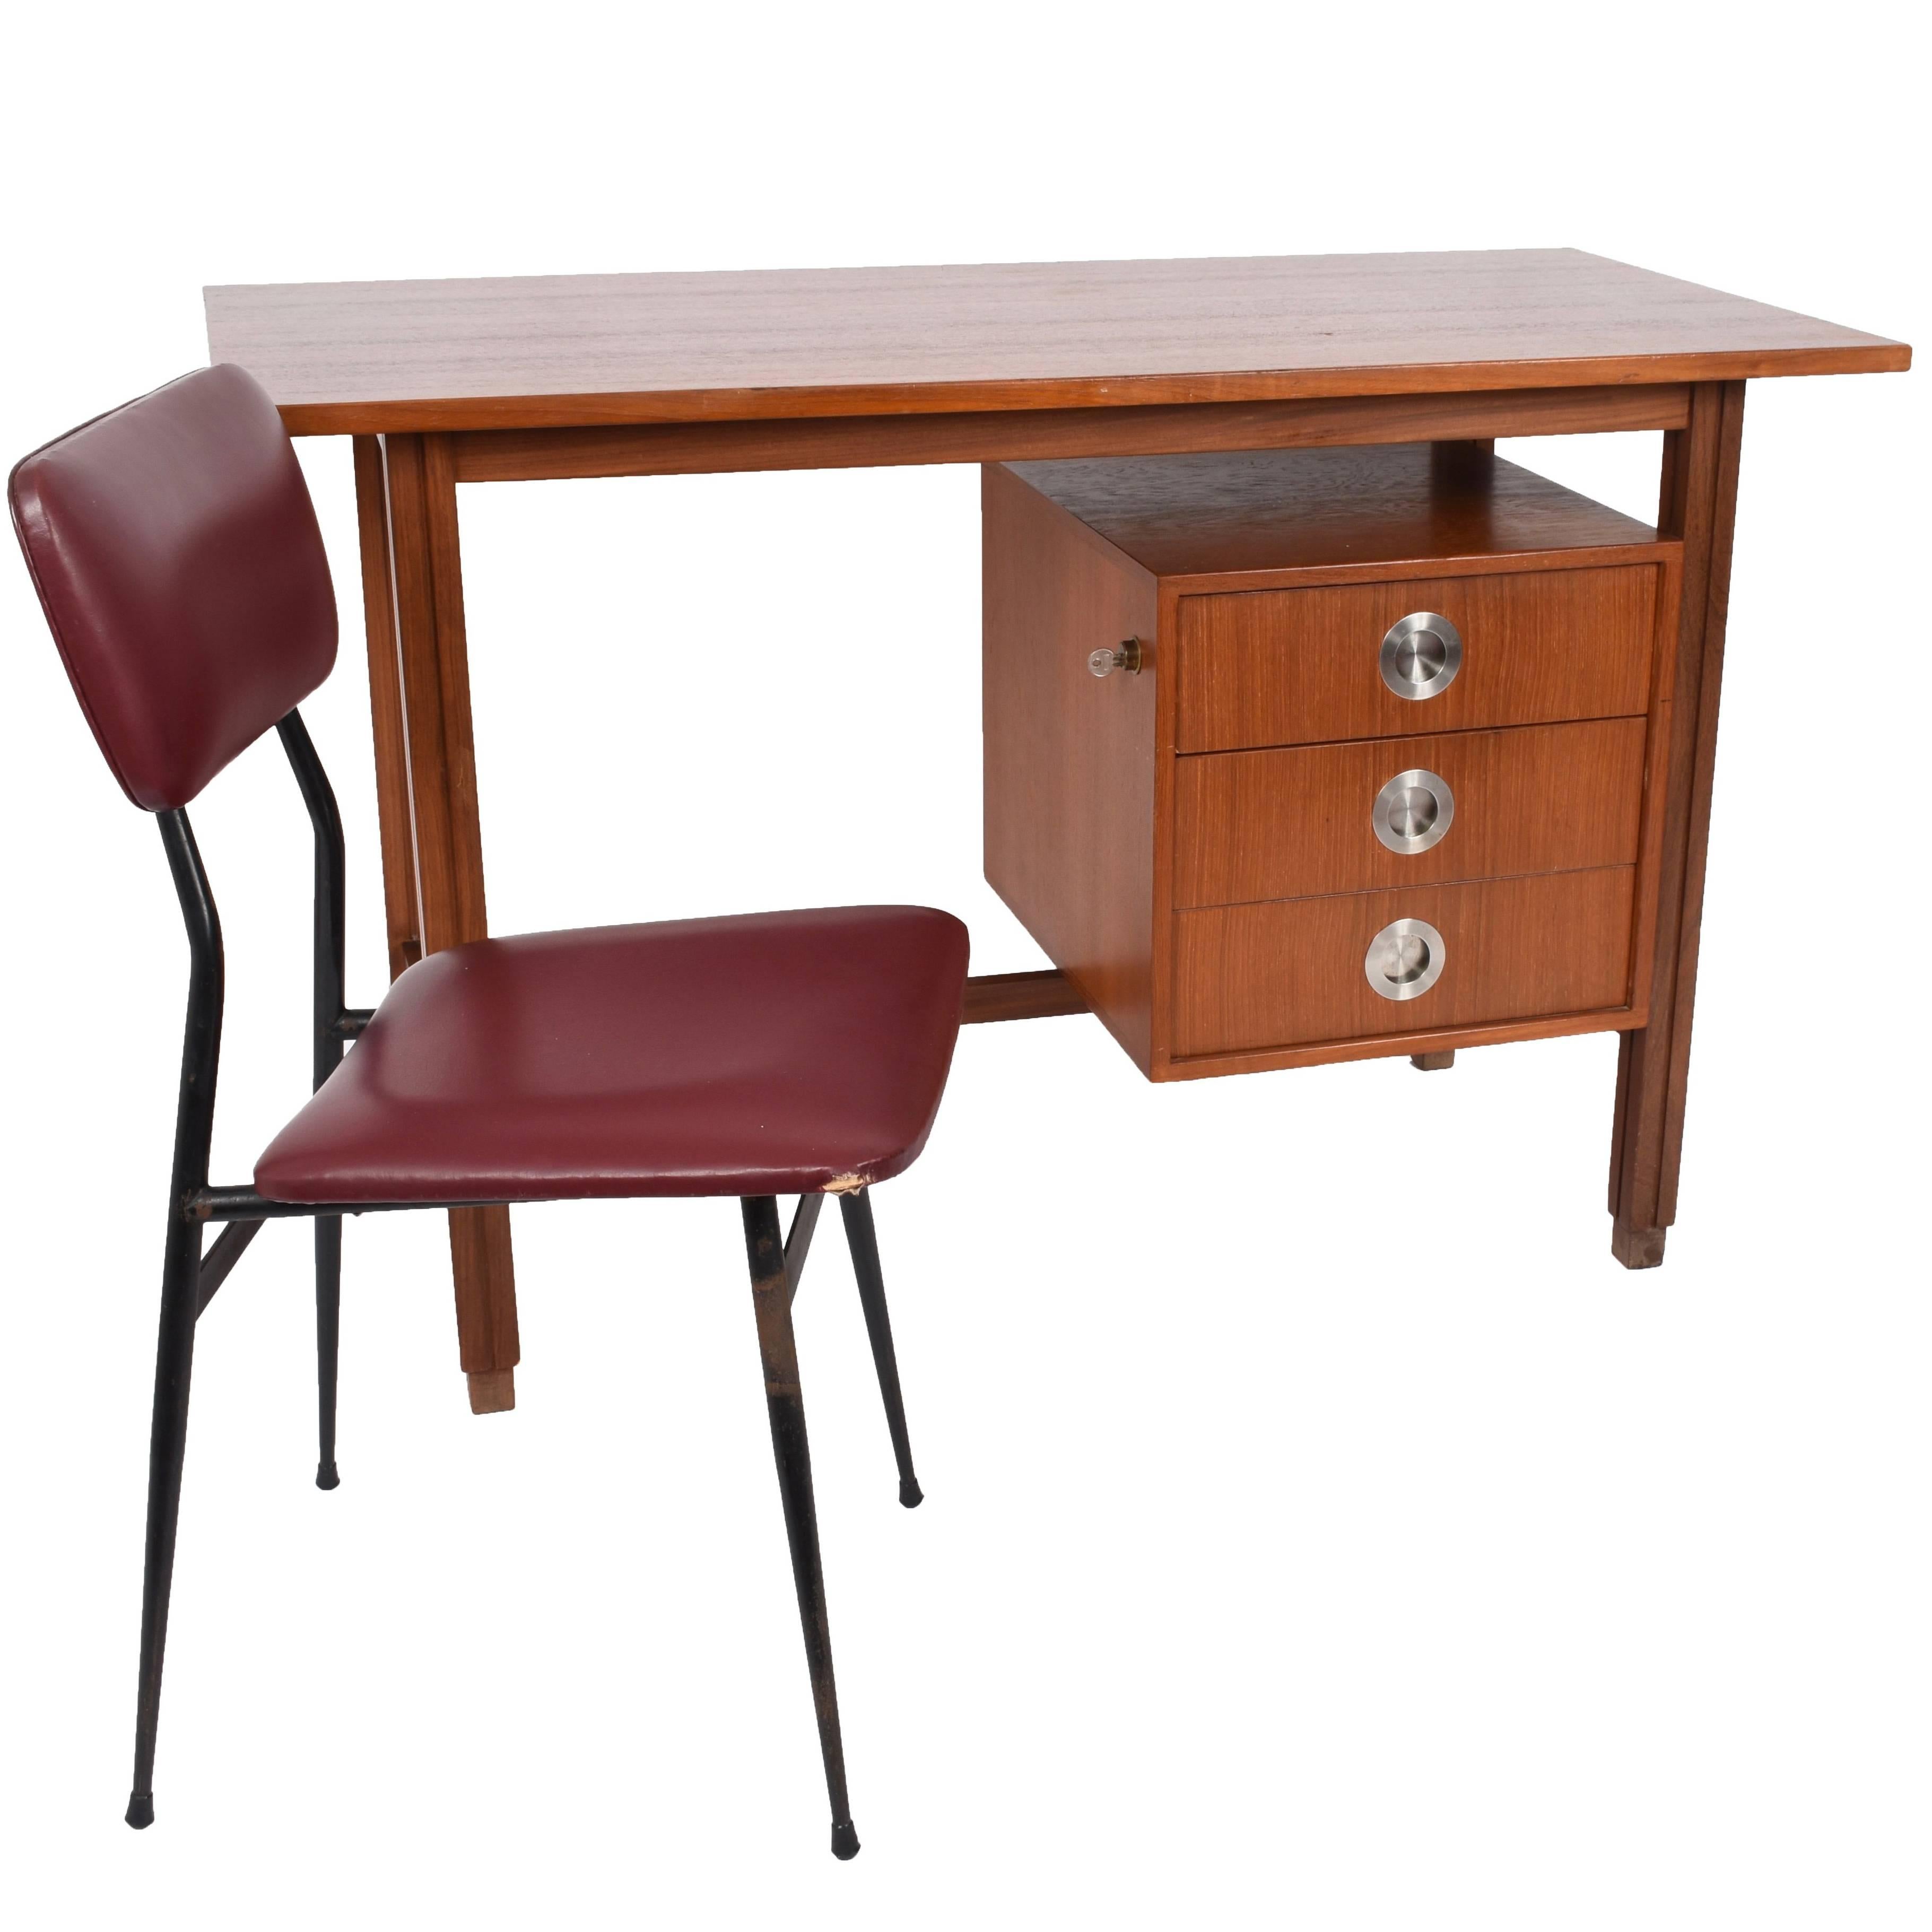 Amazing Mid-Century Modern teak and steel desk. This wonderful item is attributable to Stildomus in the 1960s.

This small teak desk with brushed steel handles has an iconic side closure with the original key. 

This beautiful piece is in